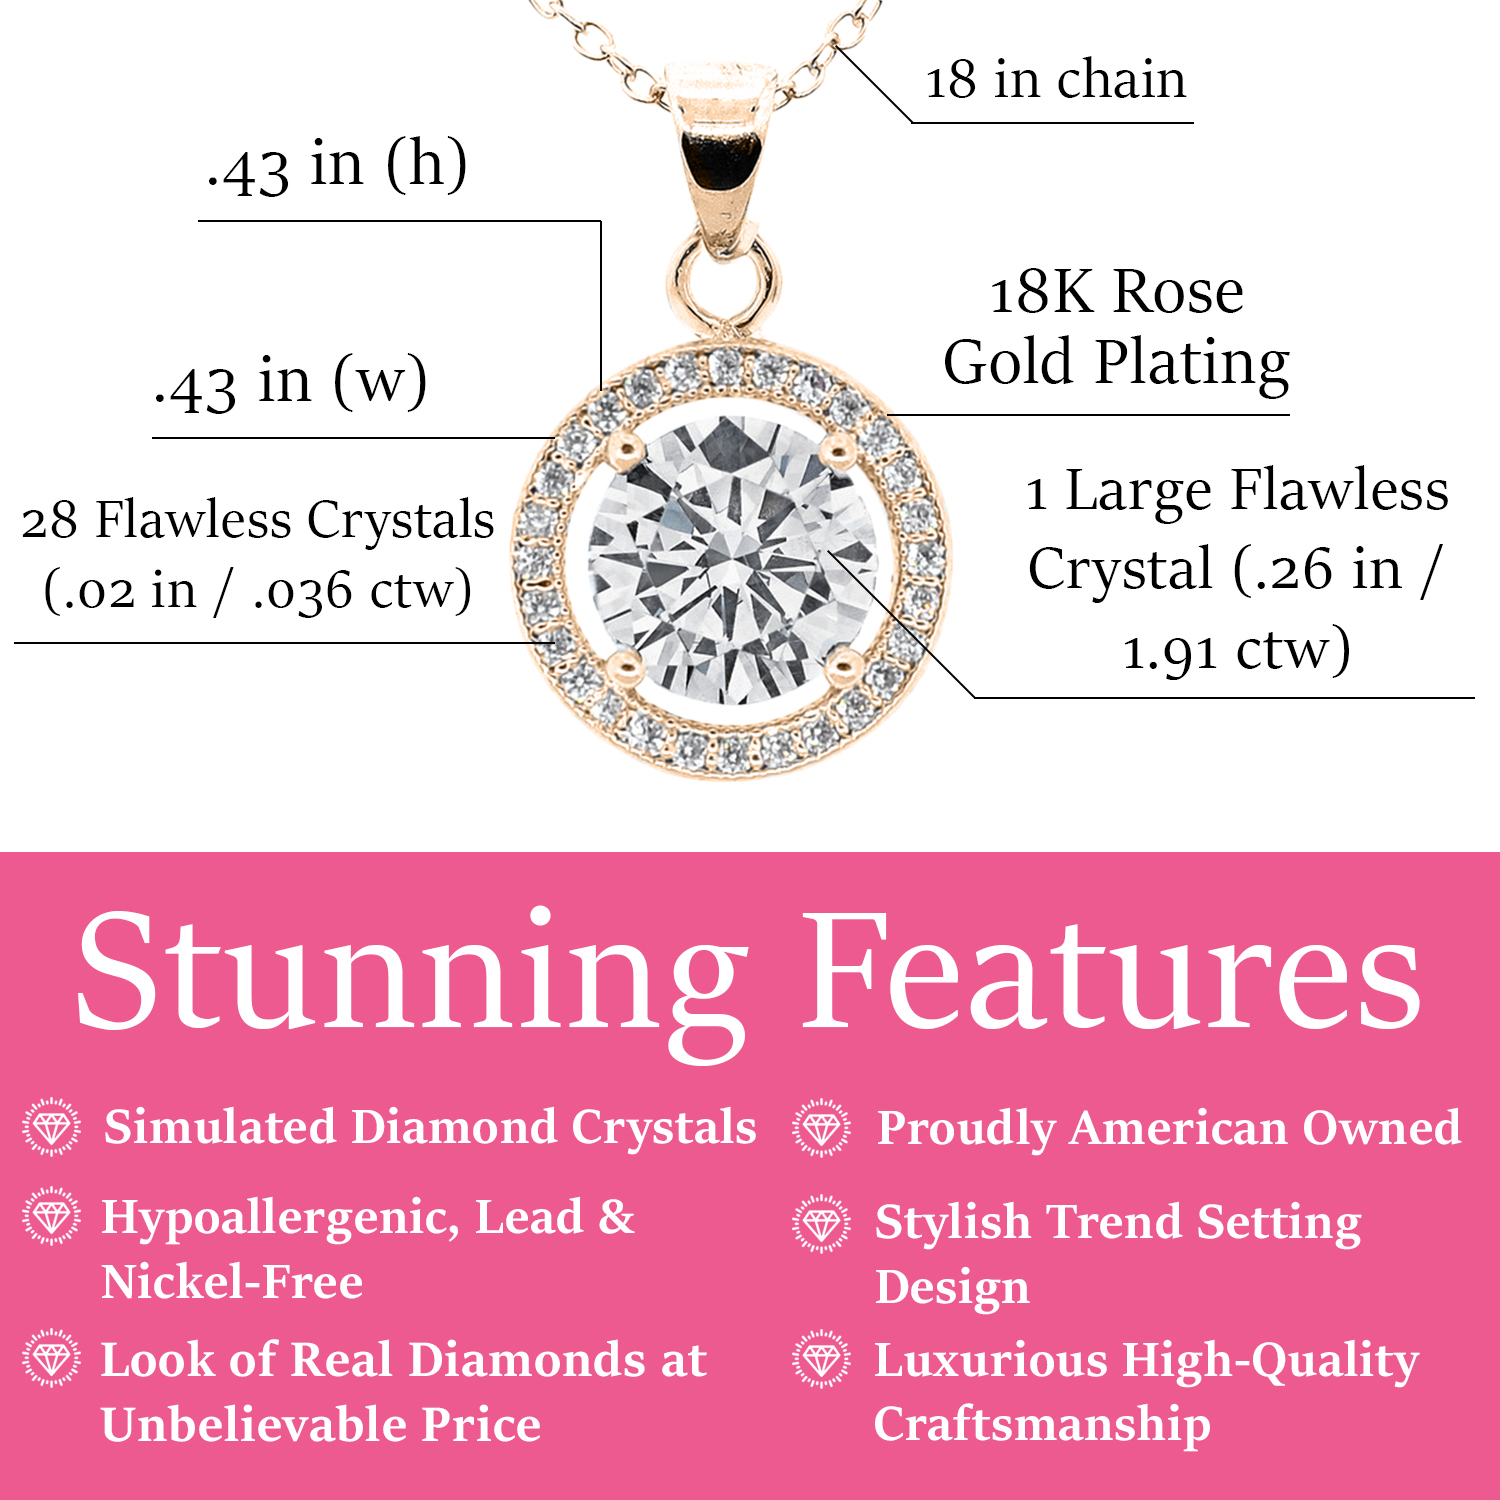 Cate & Chloe Blake 18k Rose Gold Plated Halo Necklace for Women | CZ Crystal Necklace, Jewelry Gift for Her - image 5 of 9